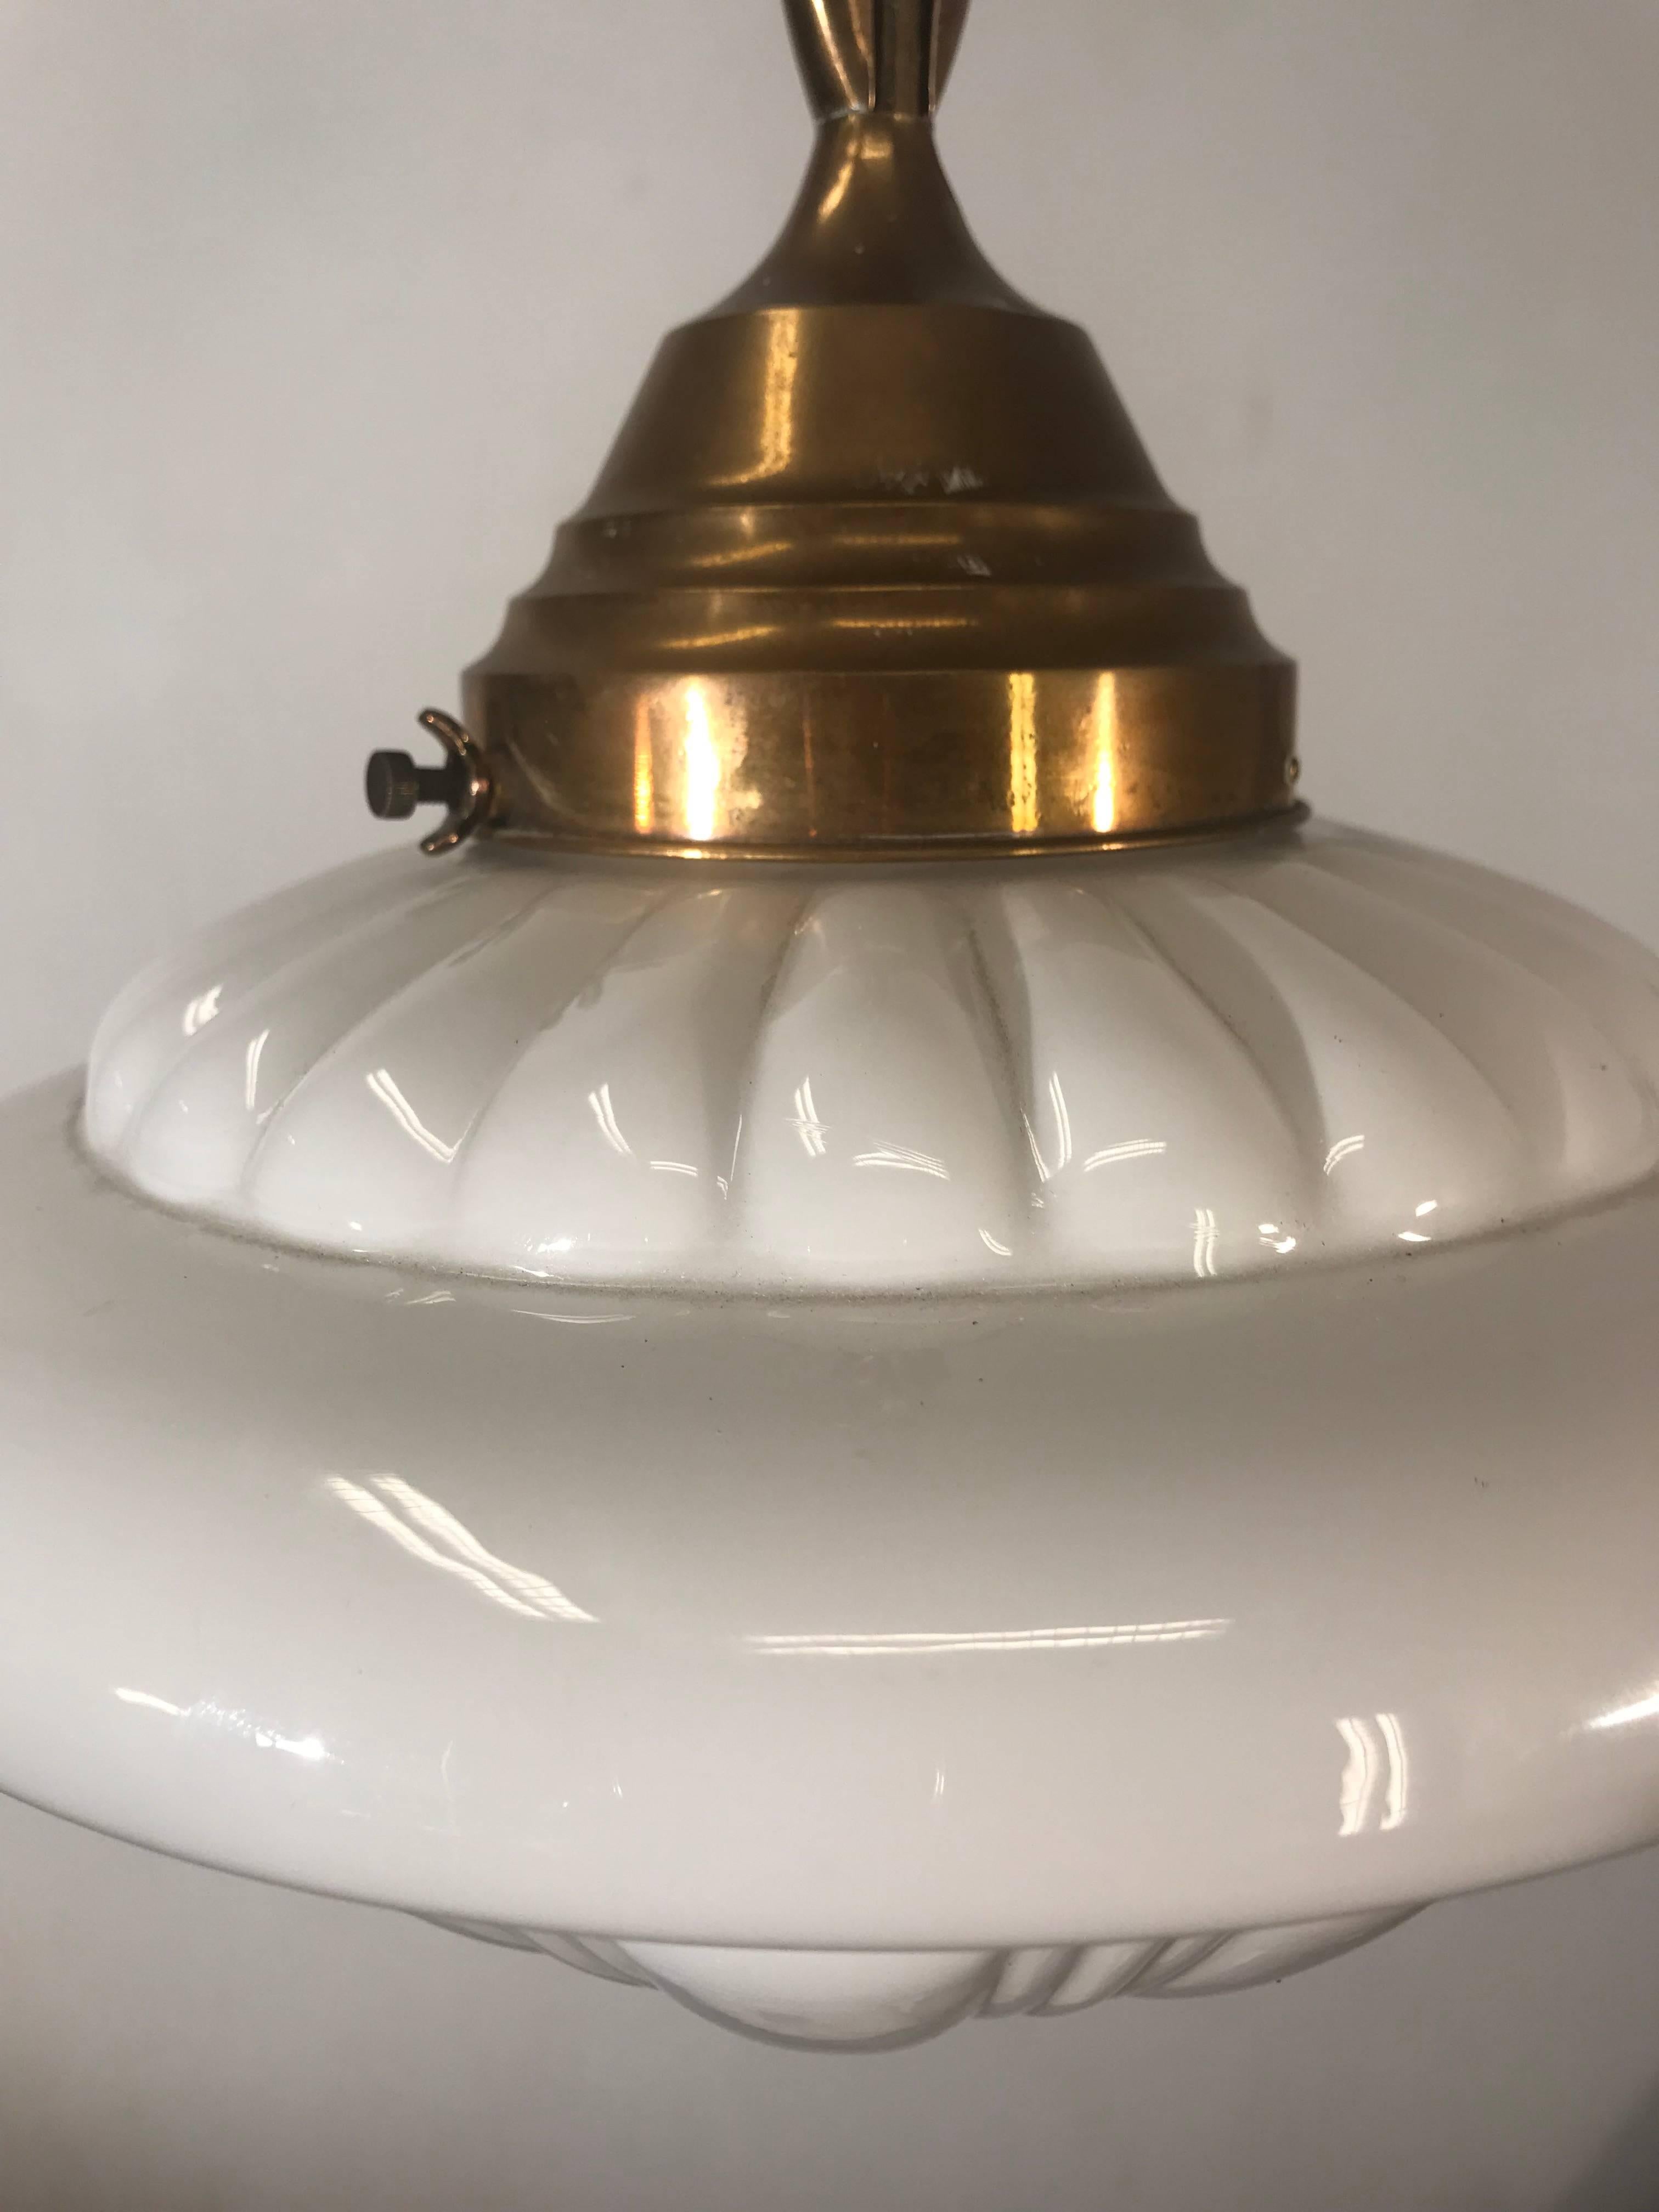 Early 1900s Rare Art Deco Pendant / Light Fixture with Glass Shade & Brass Chain 4